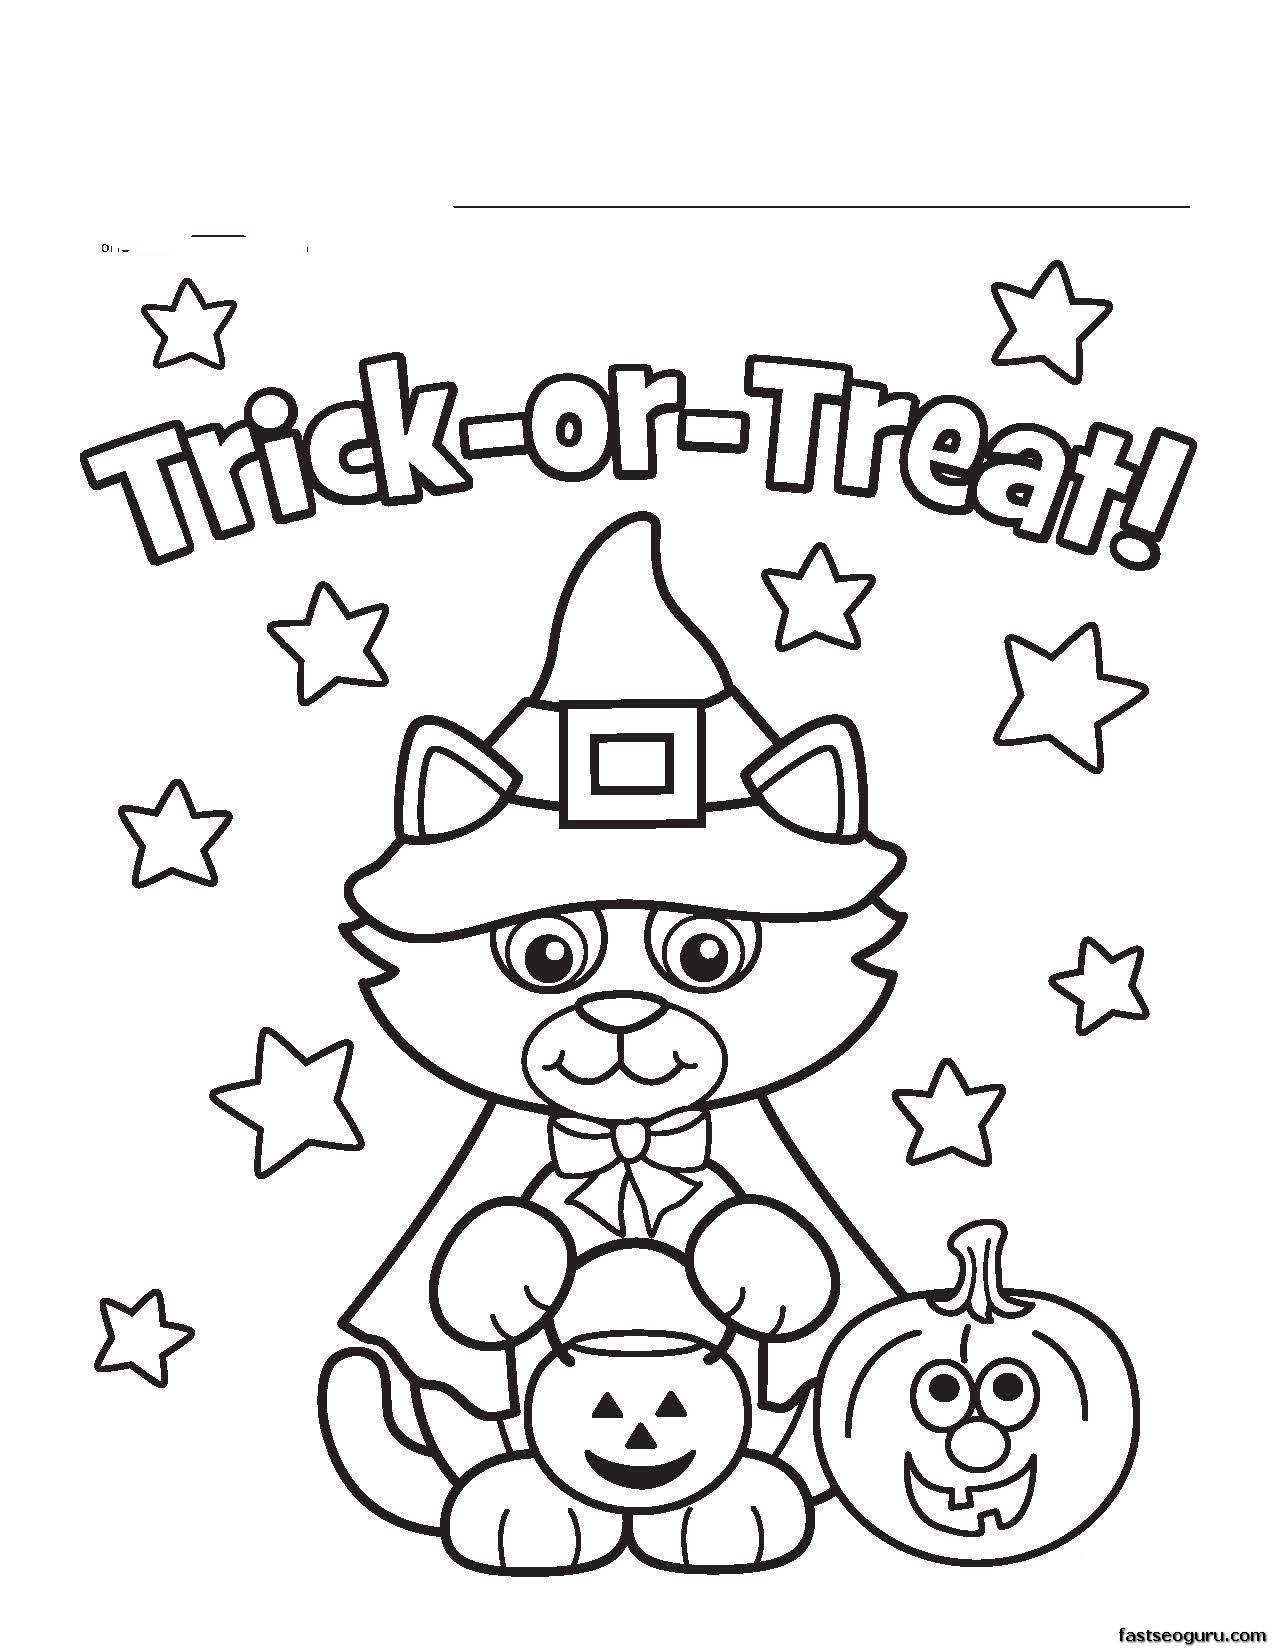 Halloween Coloring Pages For Toddlers At GetColorings Free Printable Colorings Pages To